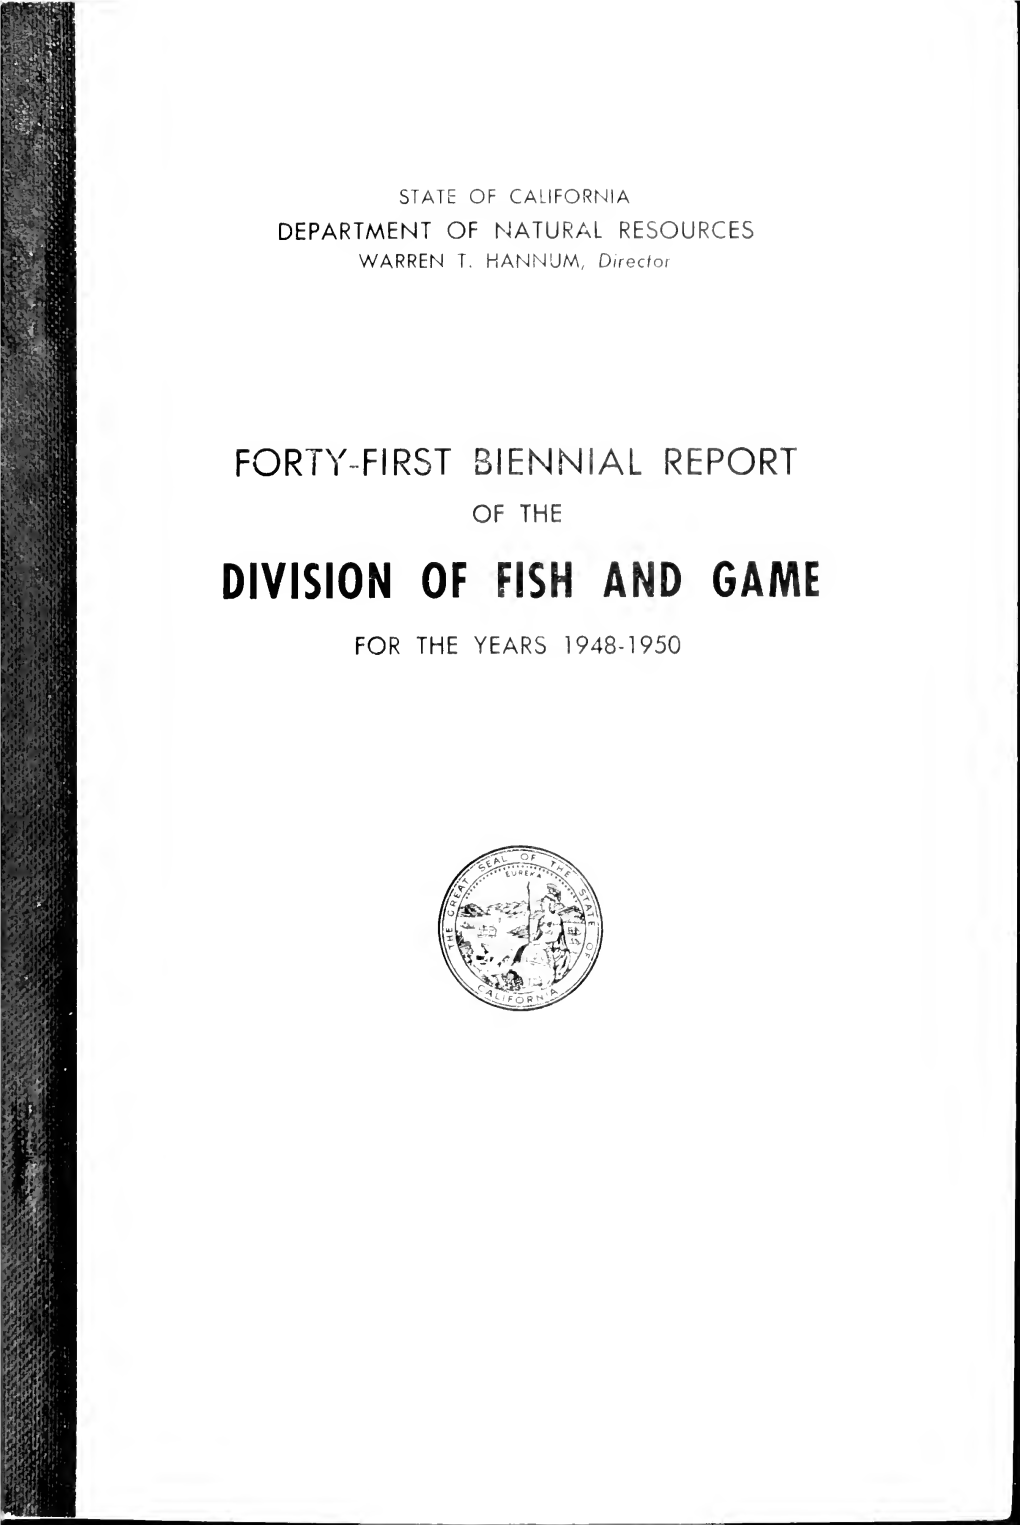 Division of Fish and Game